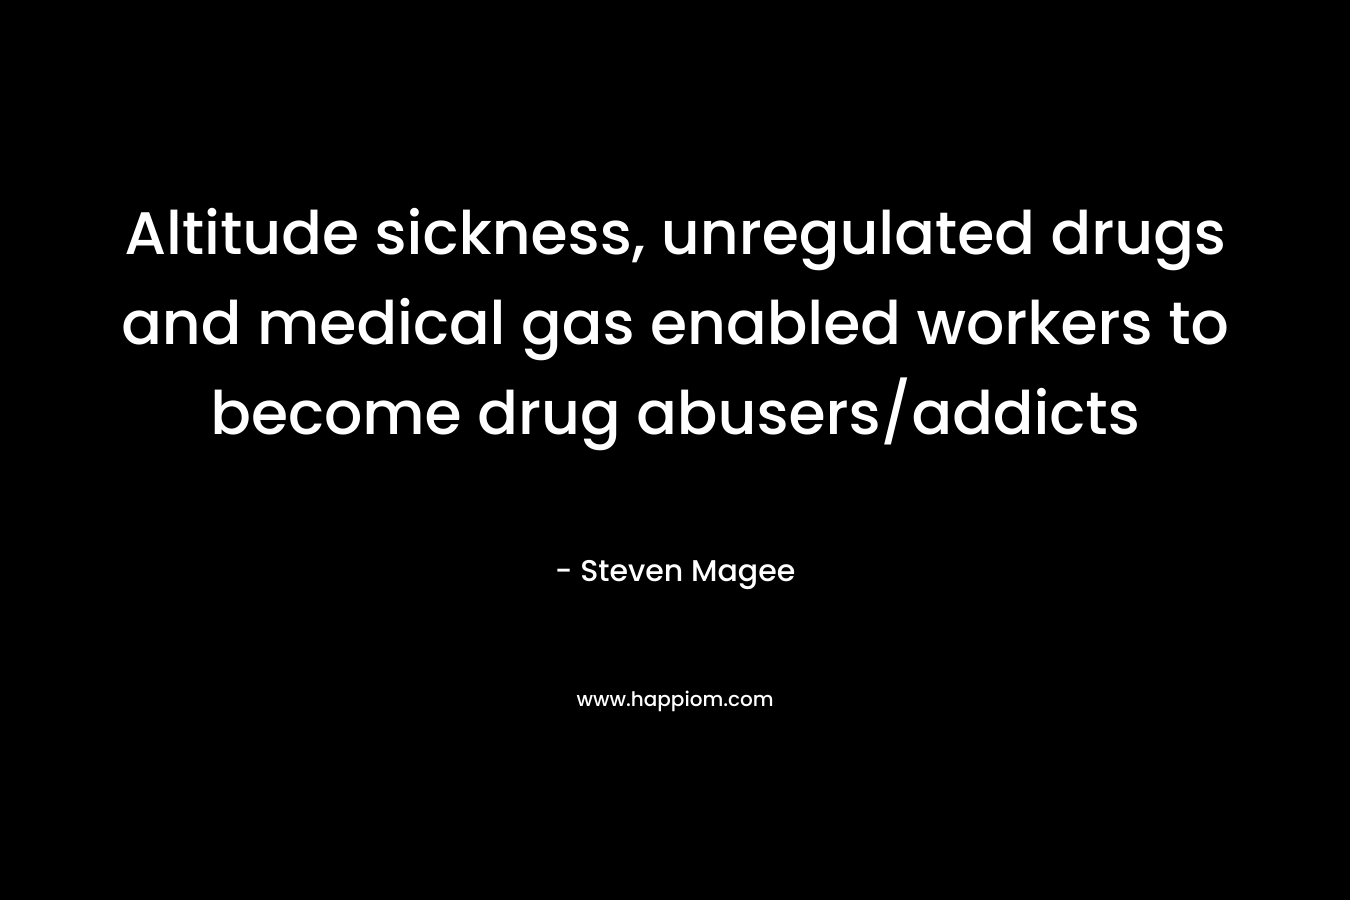 Altitude sickness, unregulated drugs and medical gas enabled workers to become drug abusers/addicts – Steven Magee